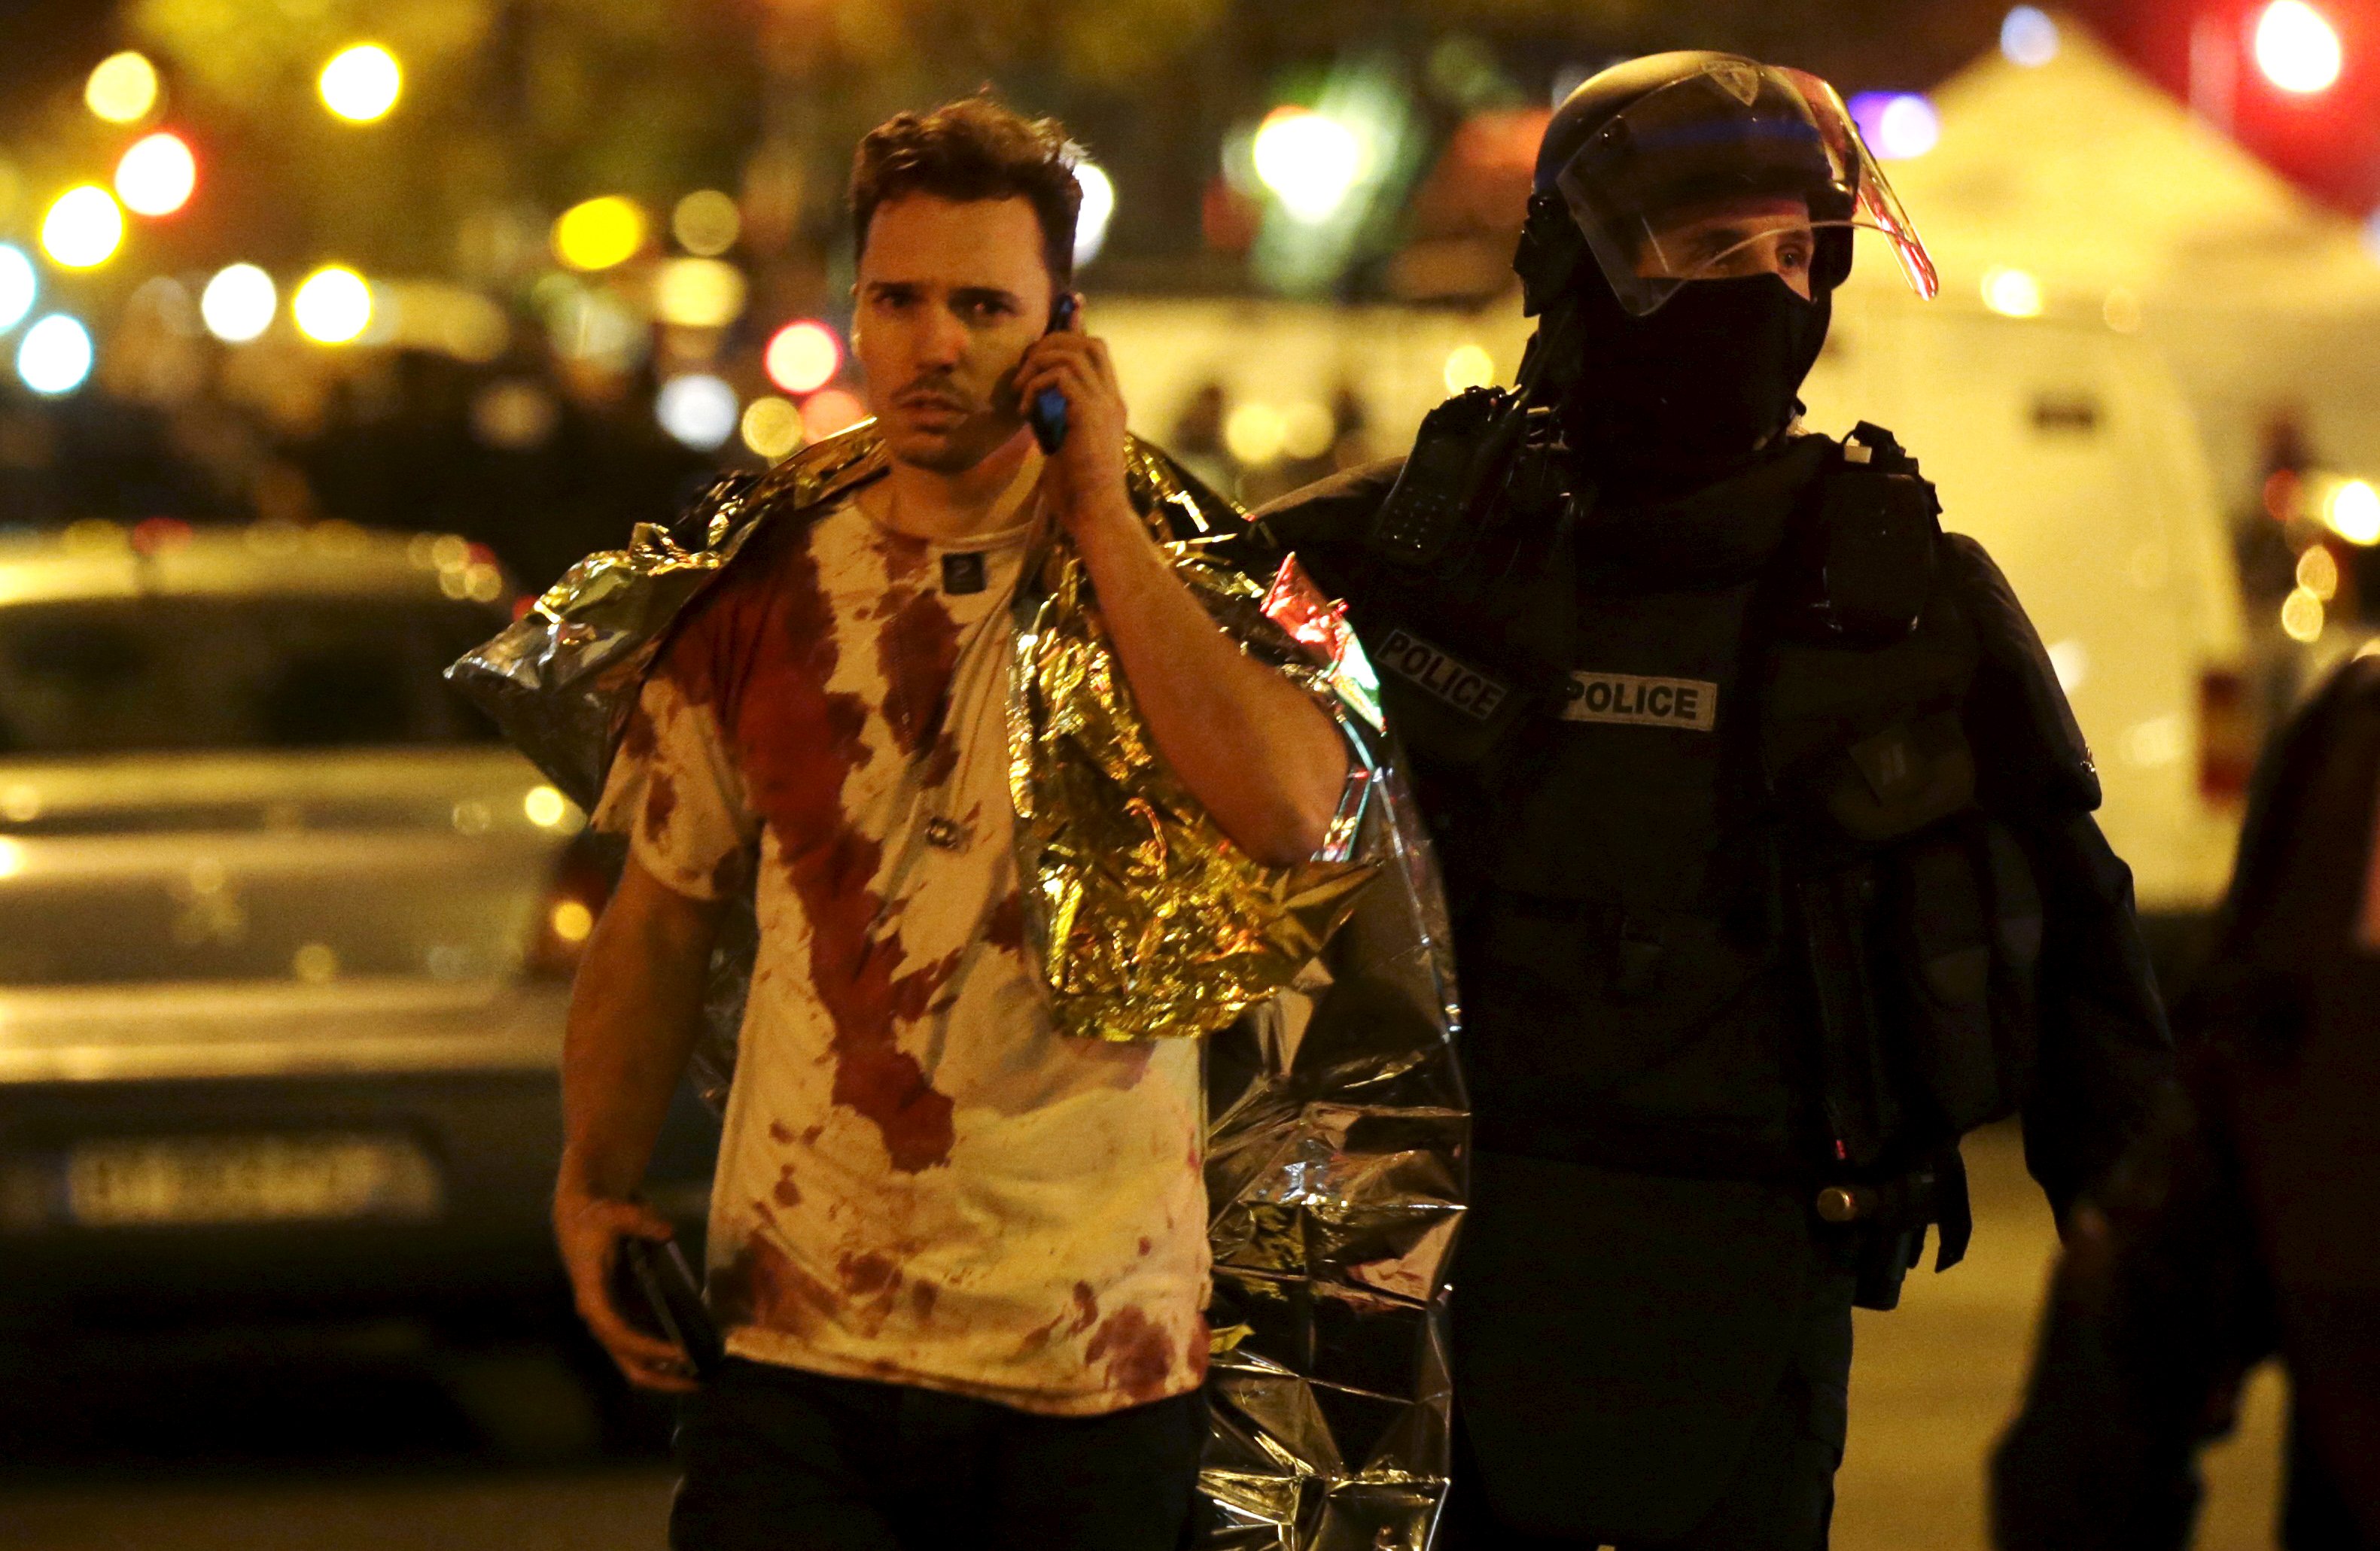 A French policeman assists a blood-covered victim near the Bataclan concert hall following attacks in Paris, France